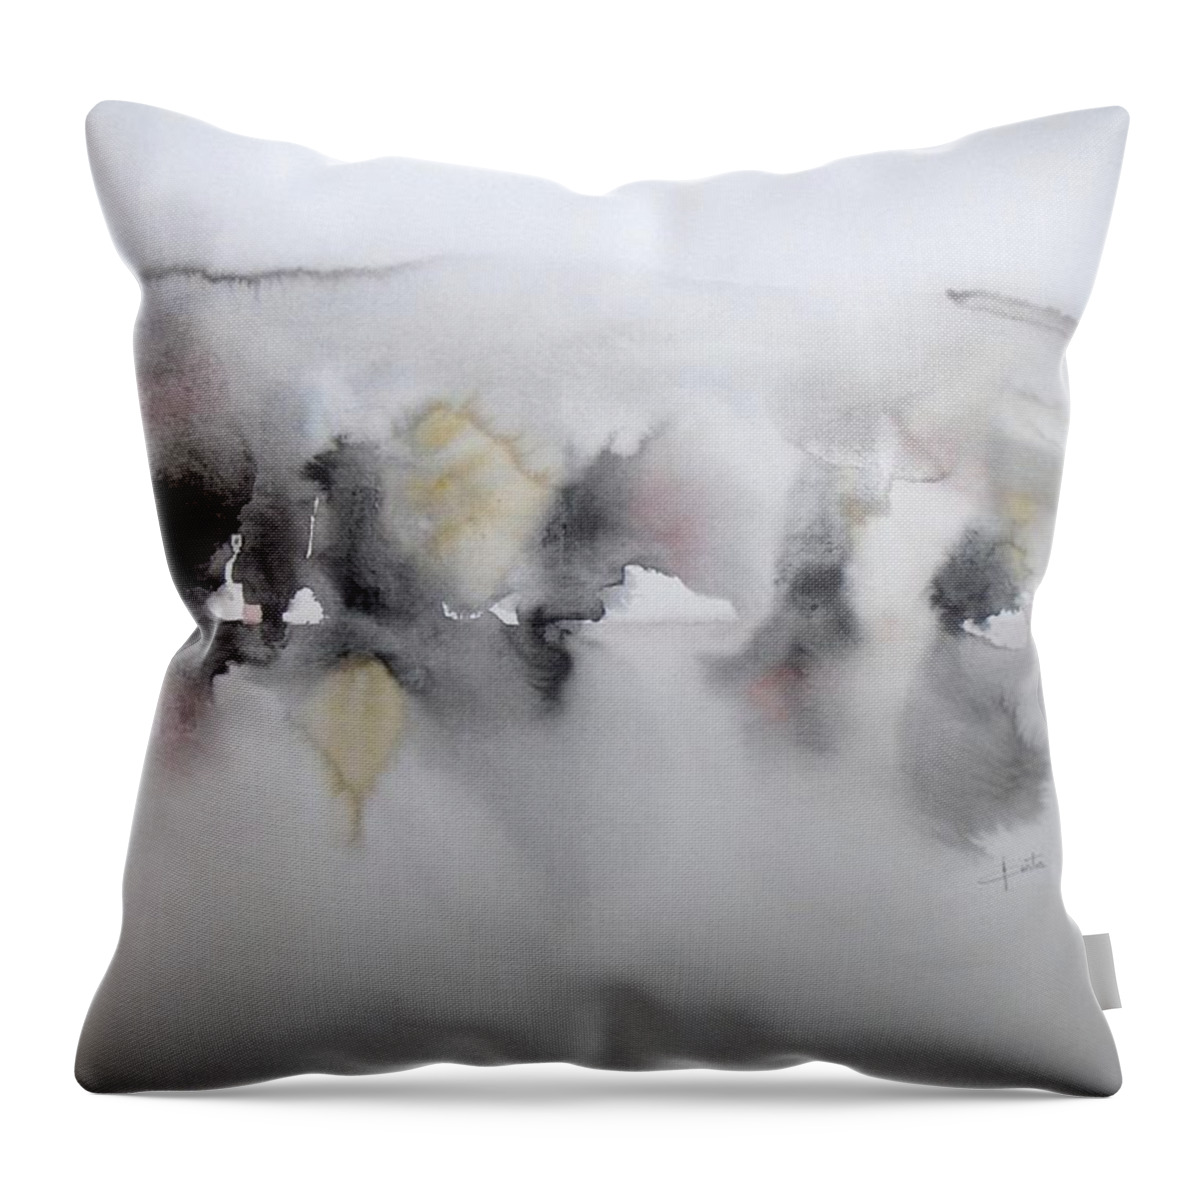 Black And White Throw Pillow featuring the painting The Shadows by Vesna Antic